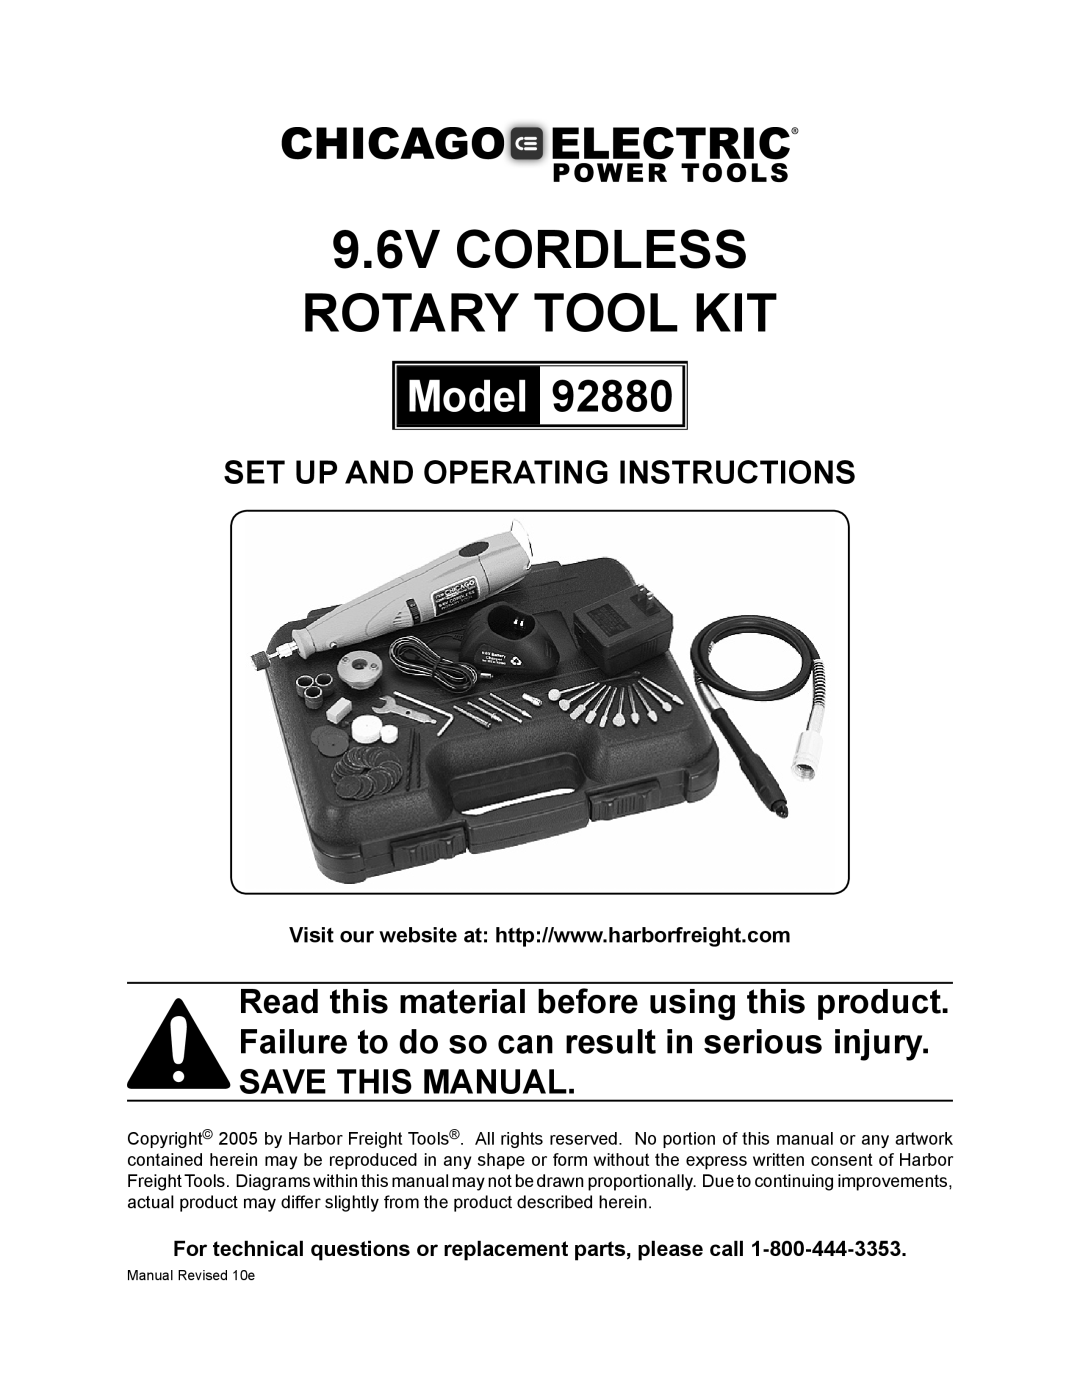 Chicago Electric 92880 operating instructions 9.6V CORDLESS ROTARY TOOL KIT, Model, Set up and Operating Instructions 